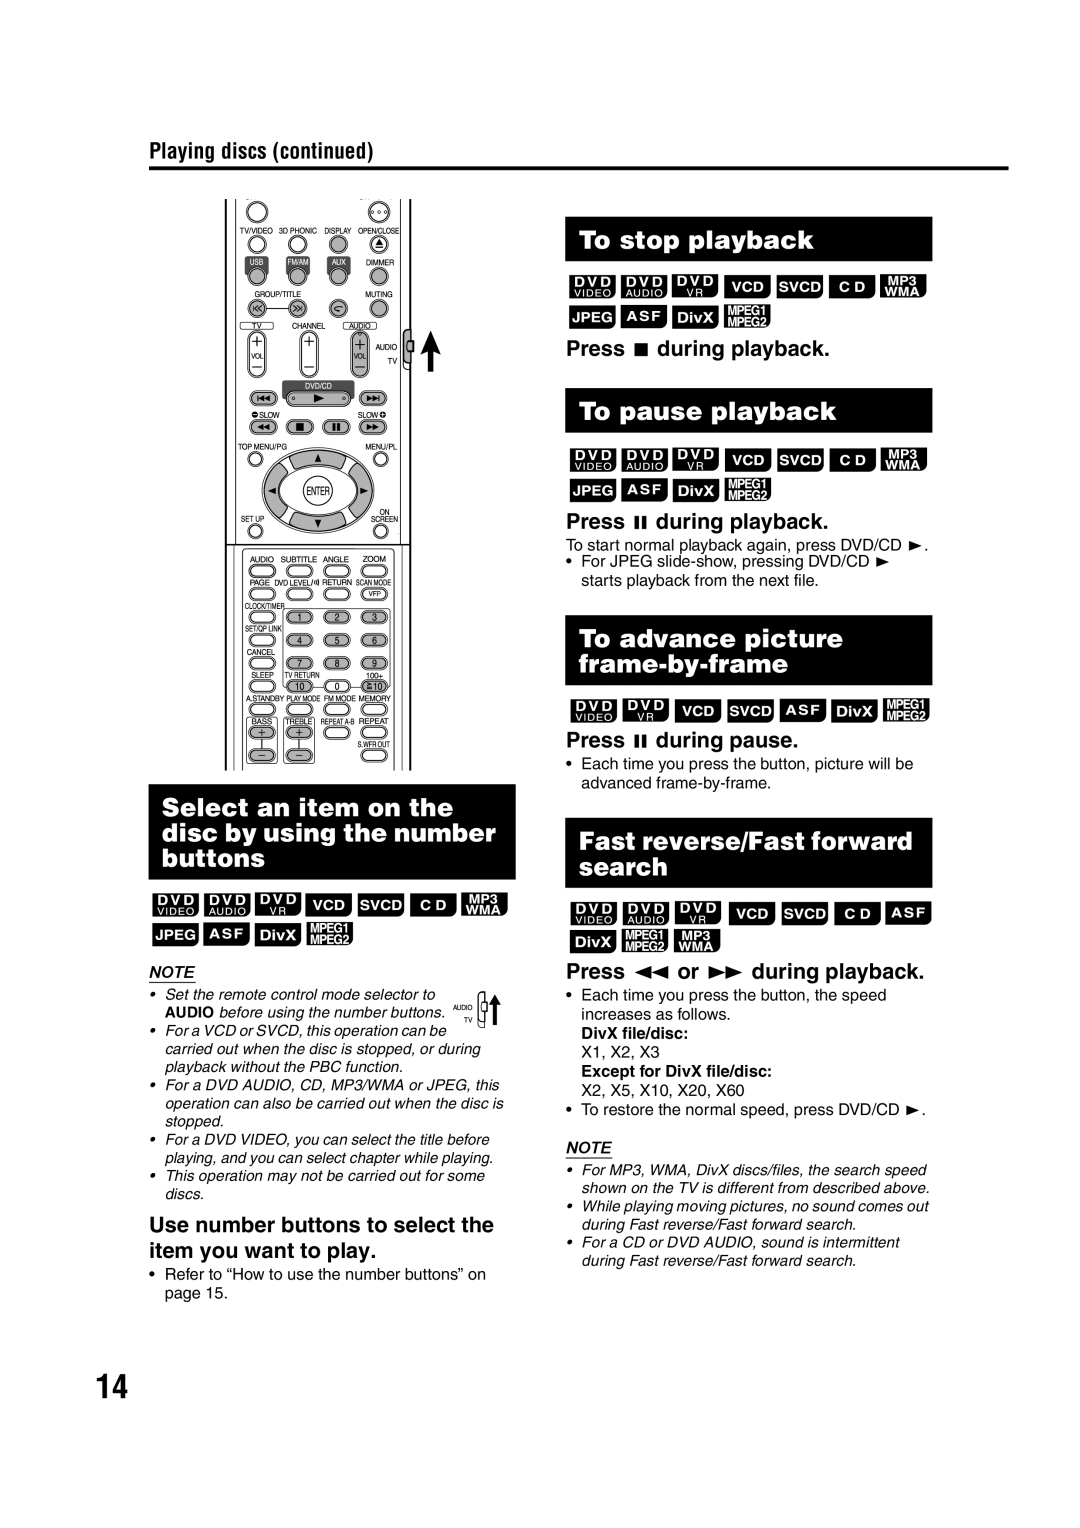 JVC EX-D11 manual To stop playback, To pause playback, To advance picture frame-by-frame, Fast reverse/Fast forward search 